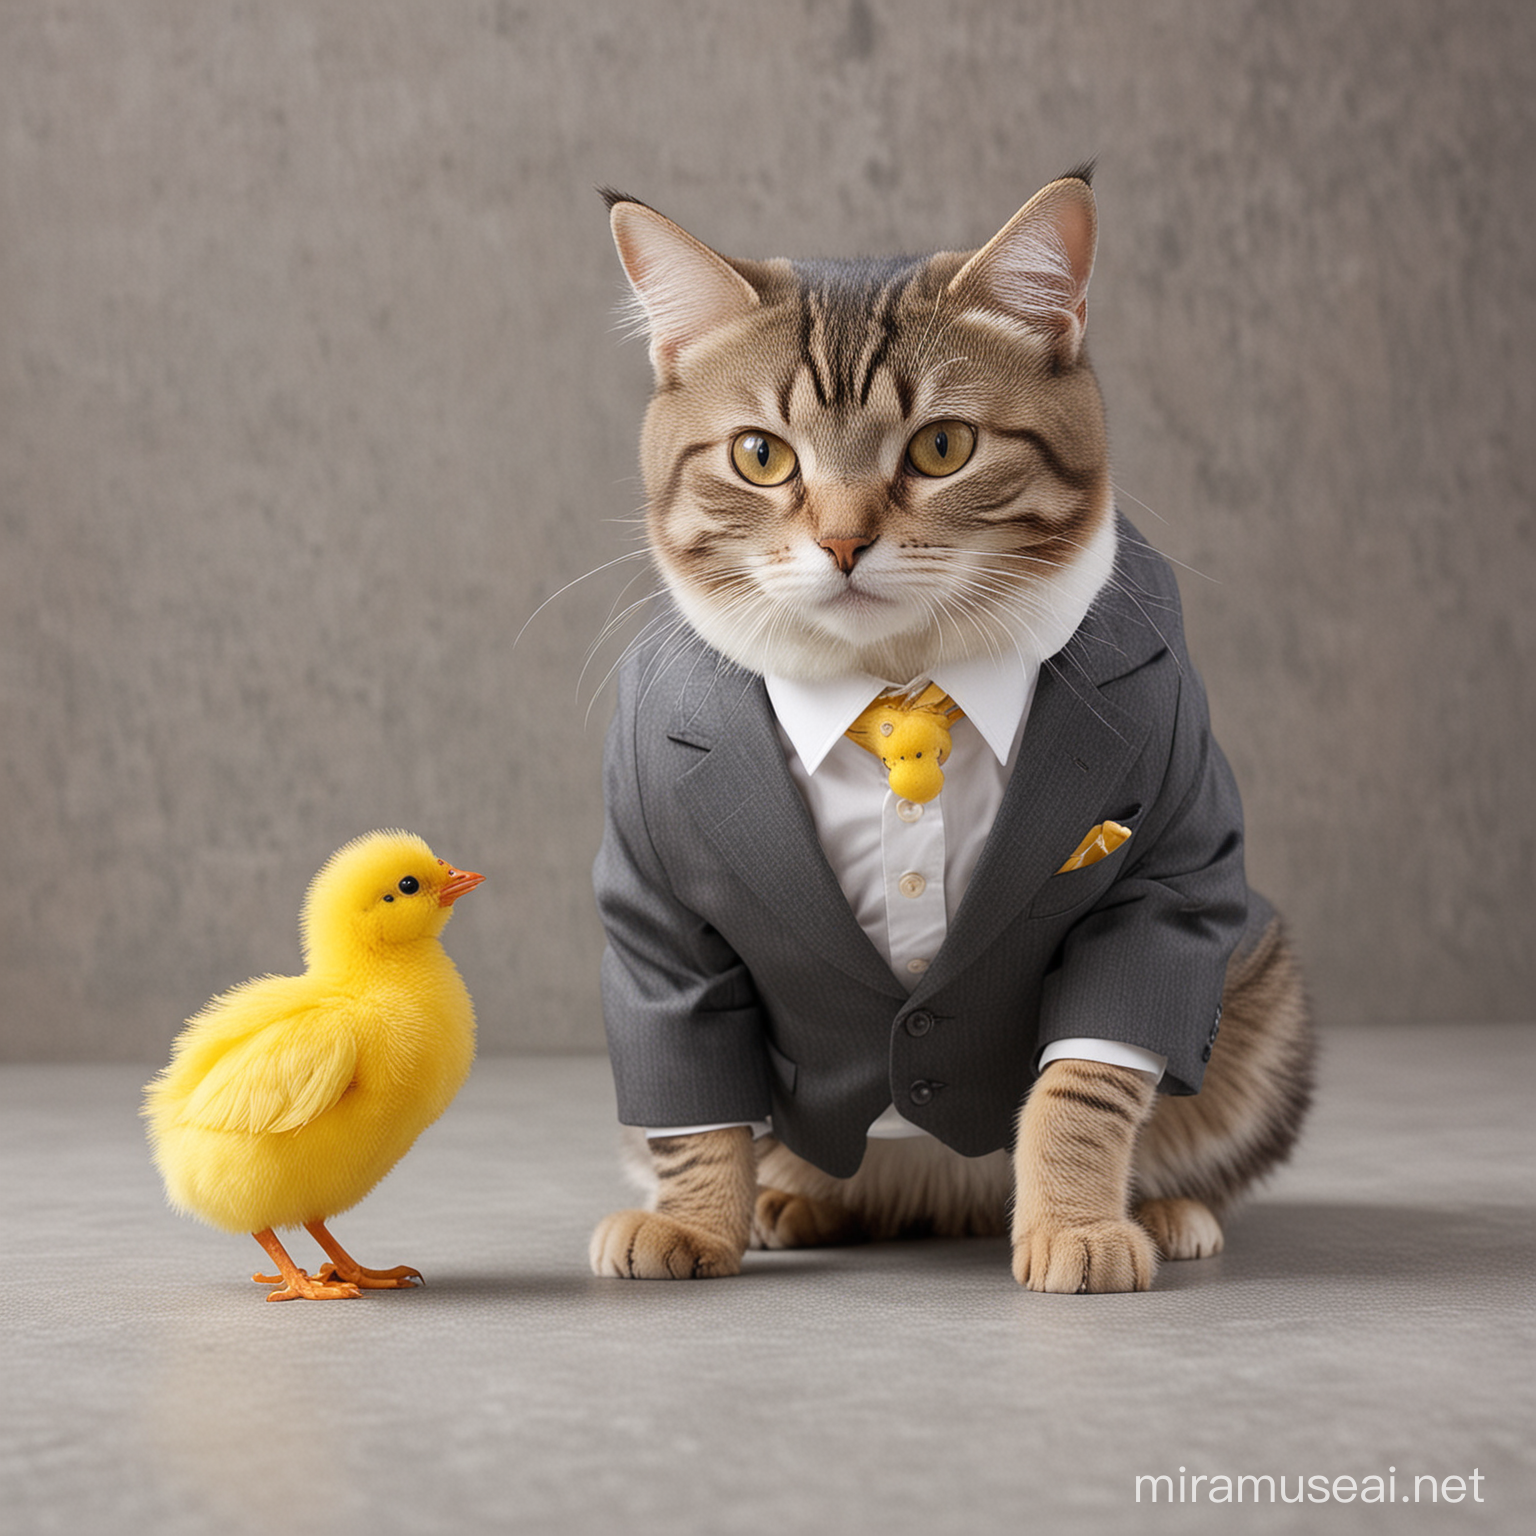 Sophisticated Cat in Formal Attire Petting a Cheerful Yellow Chick